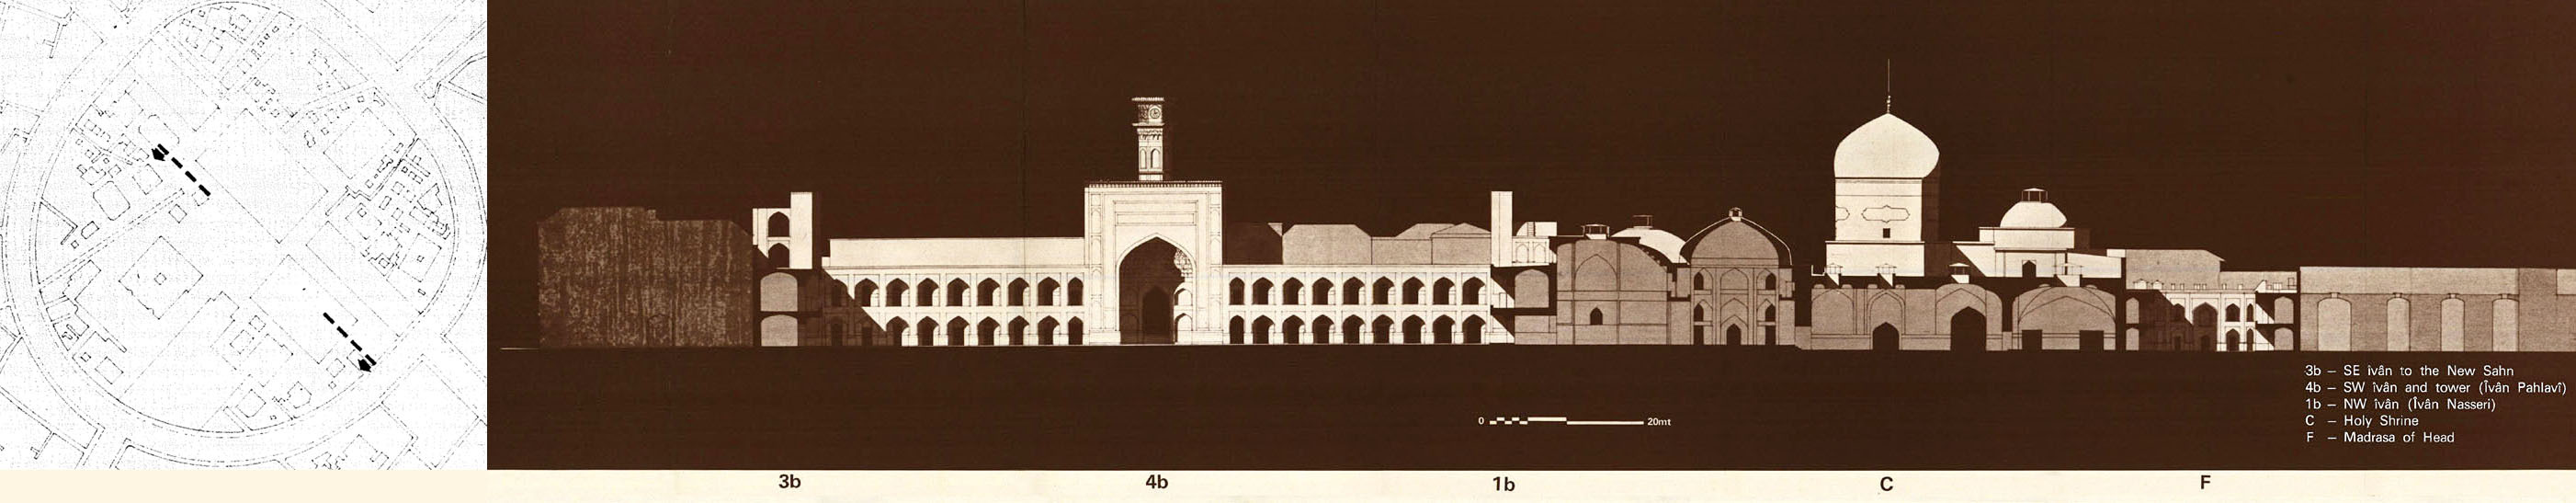 Longitudinal section, axially cutting across Allah Verdi Khan Dome. Seen, from left to right: SE iwan to the new courtyard (3b); SW iwan and tower (or, Iwan Pahlavi, 4b), NW iwan (or, Iwan Nasseri, 1b); Holy Shrine (C); Madrasa of Head (F)